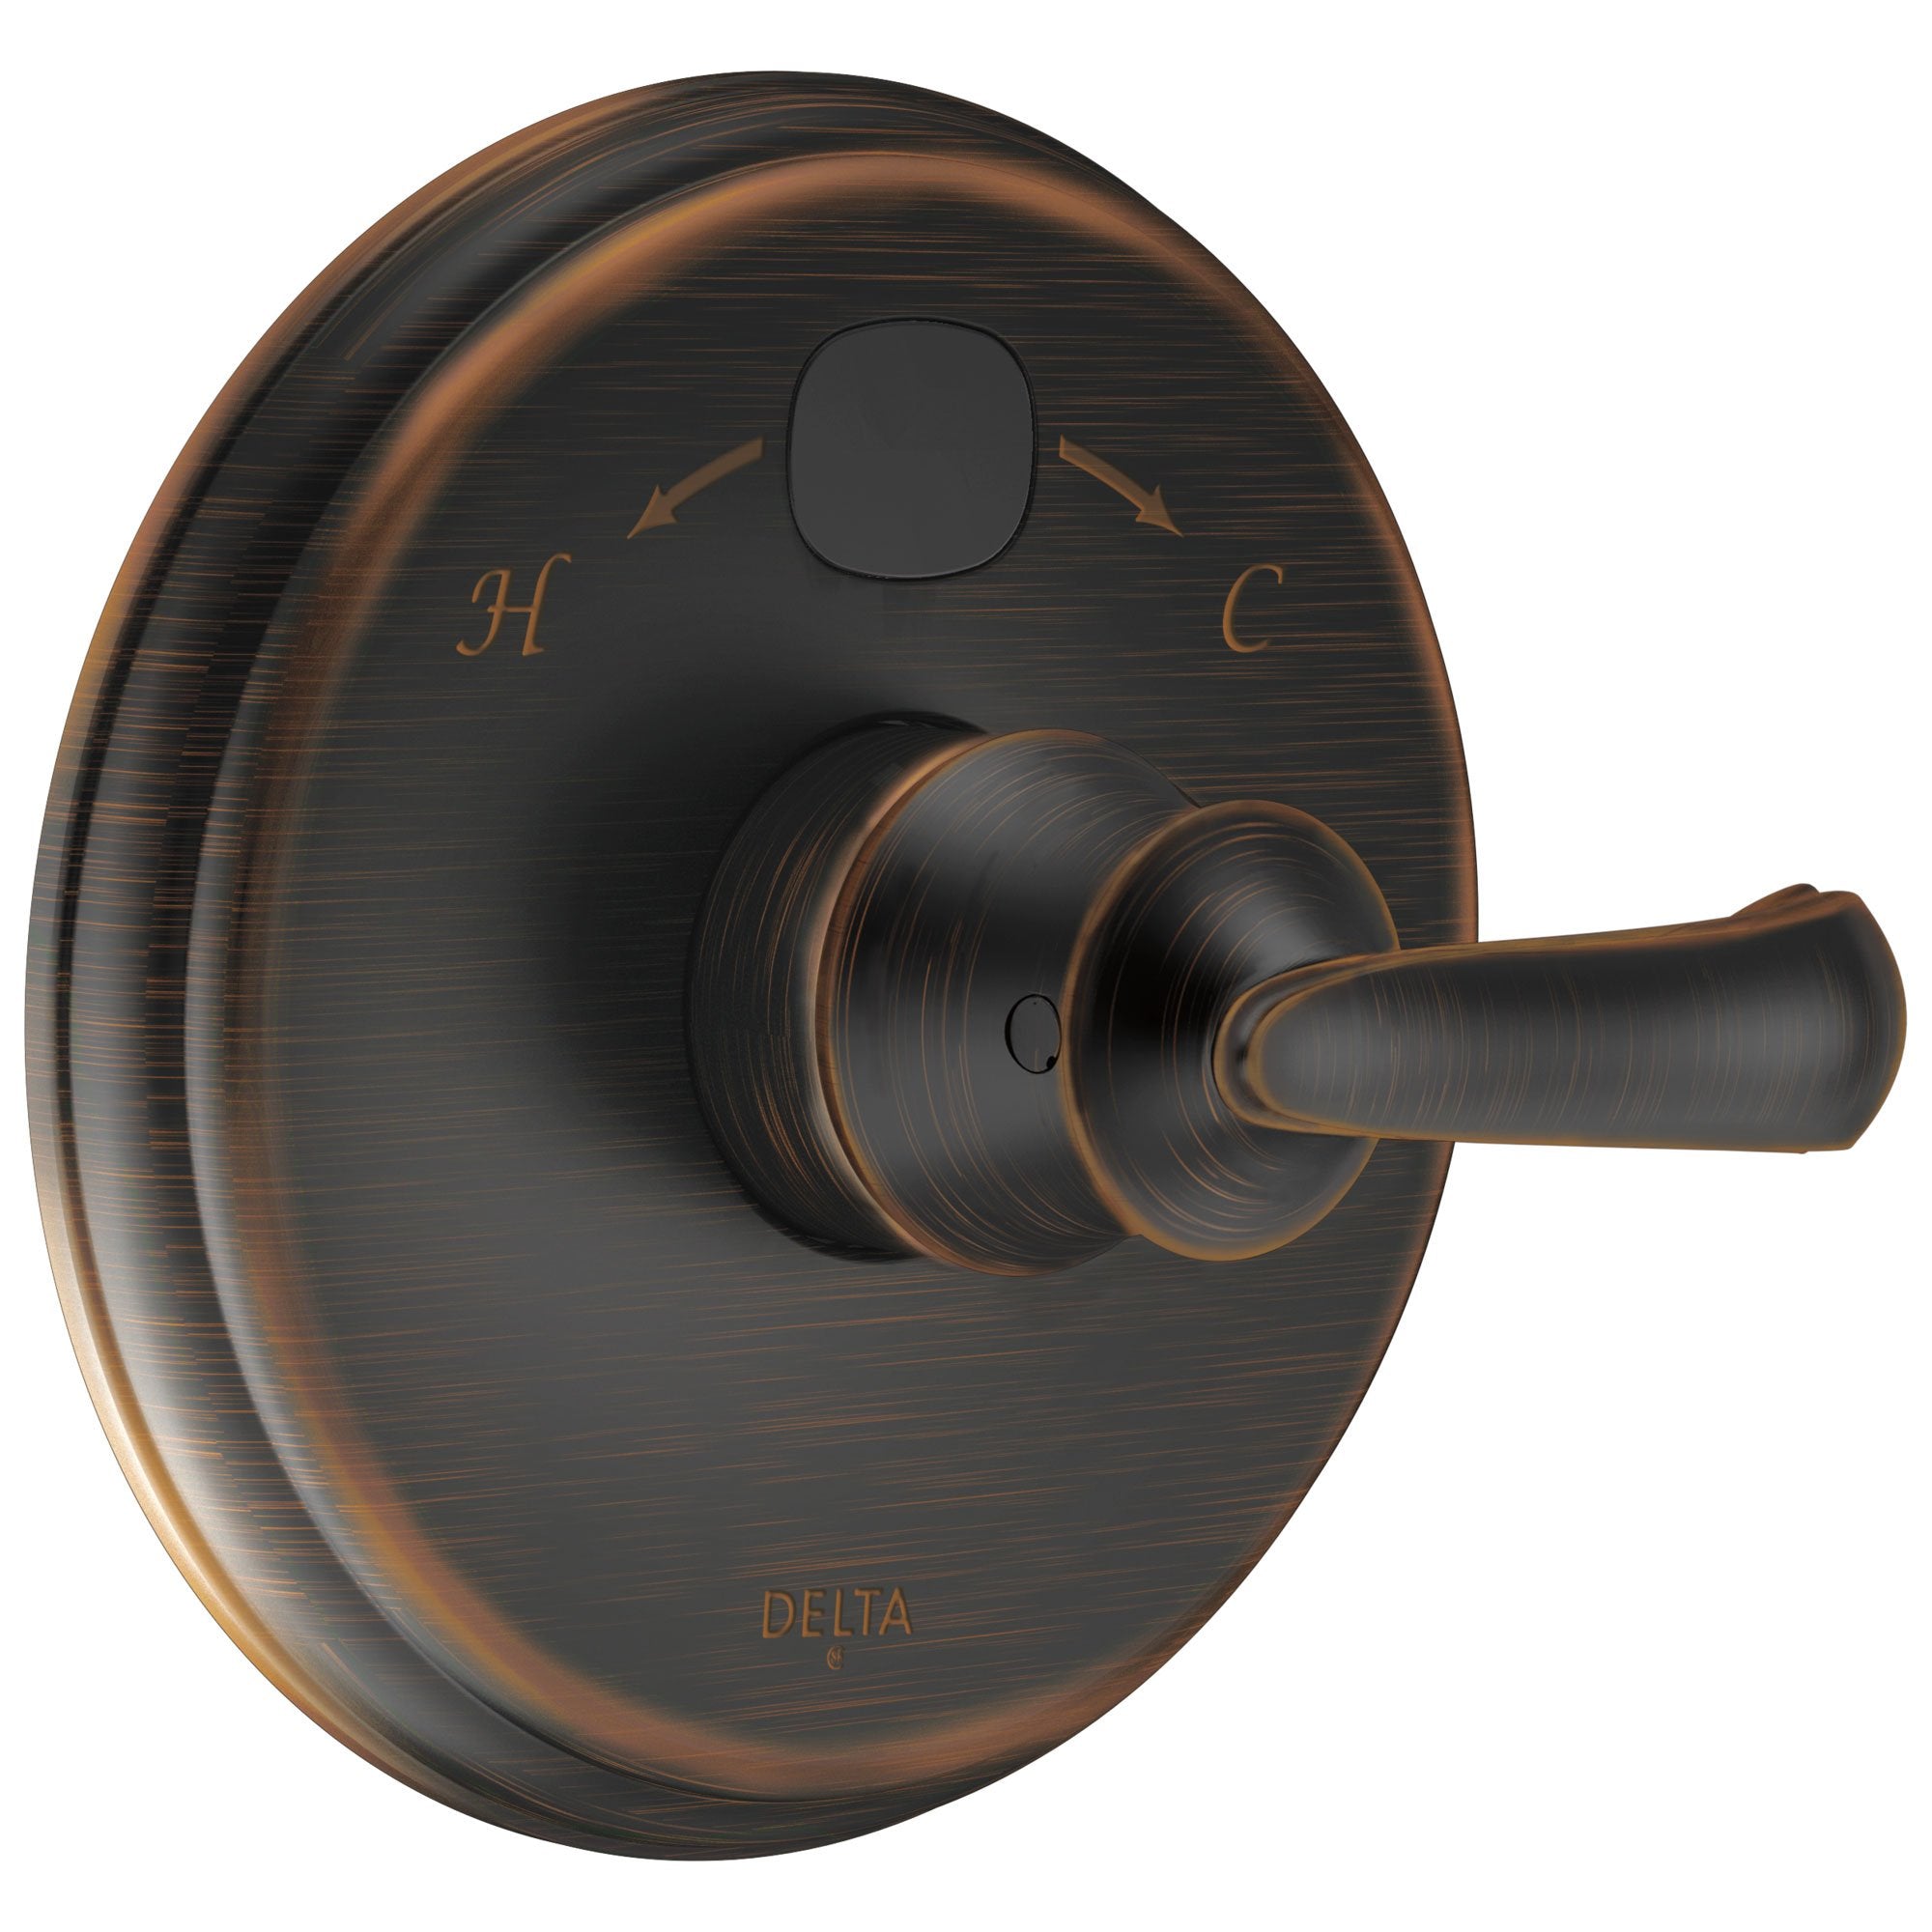 Delta Venetian Bronze Cassidy 14 Series Digital Display Temp2O Shower Valve Control COMPLETE with Single French Curve Lever Handle and Valve without Stops D1670V